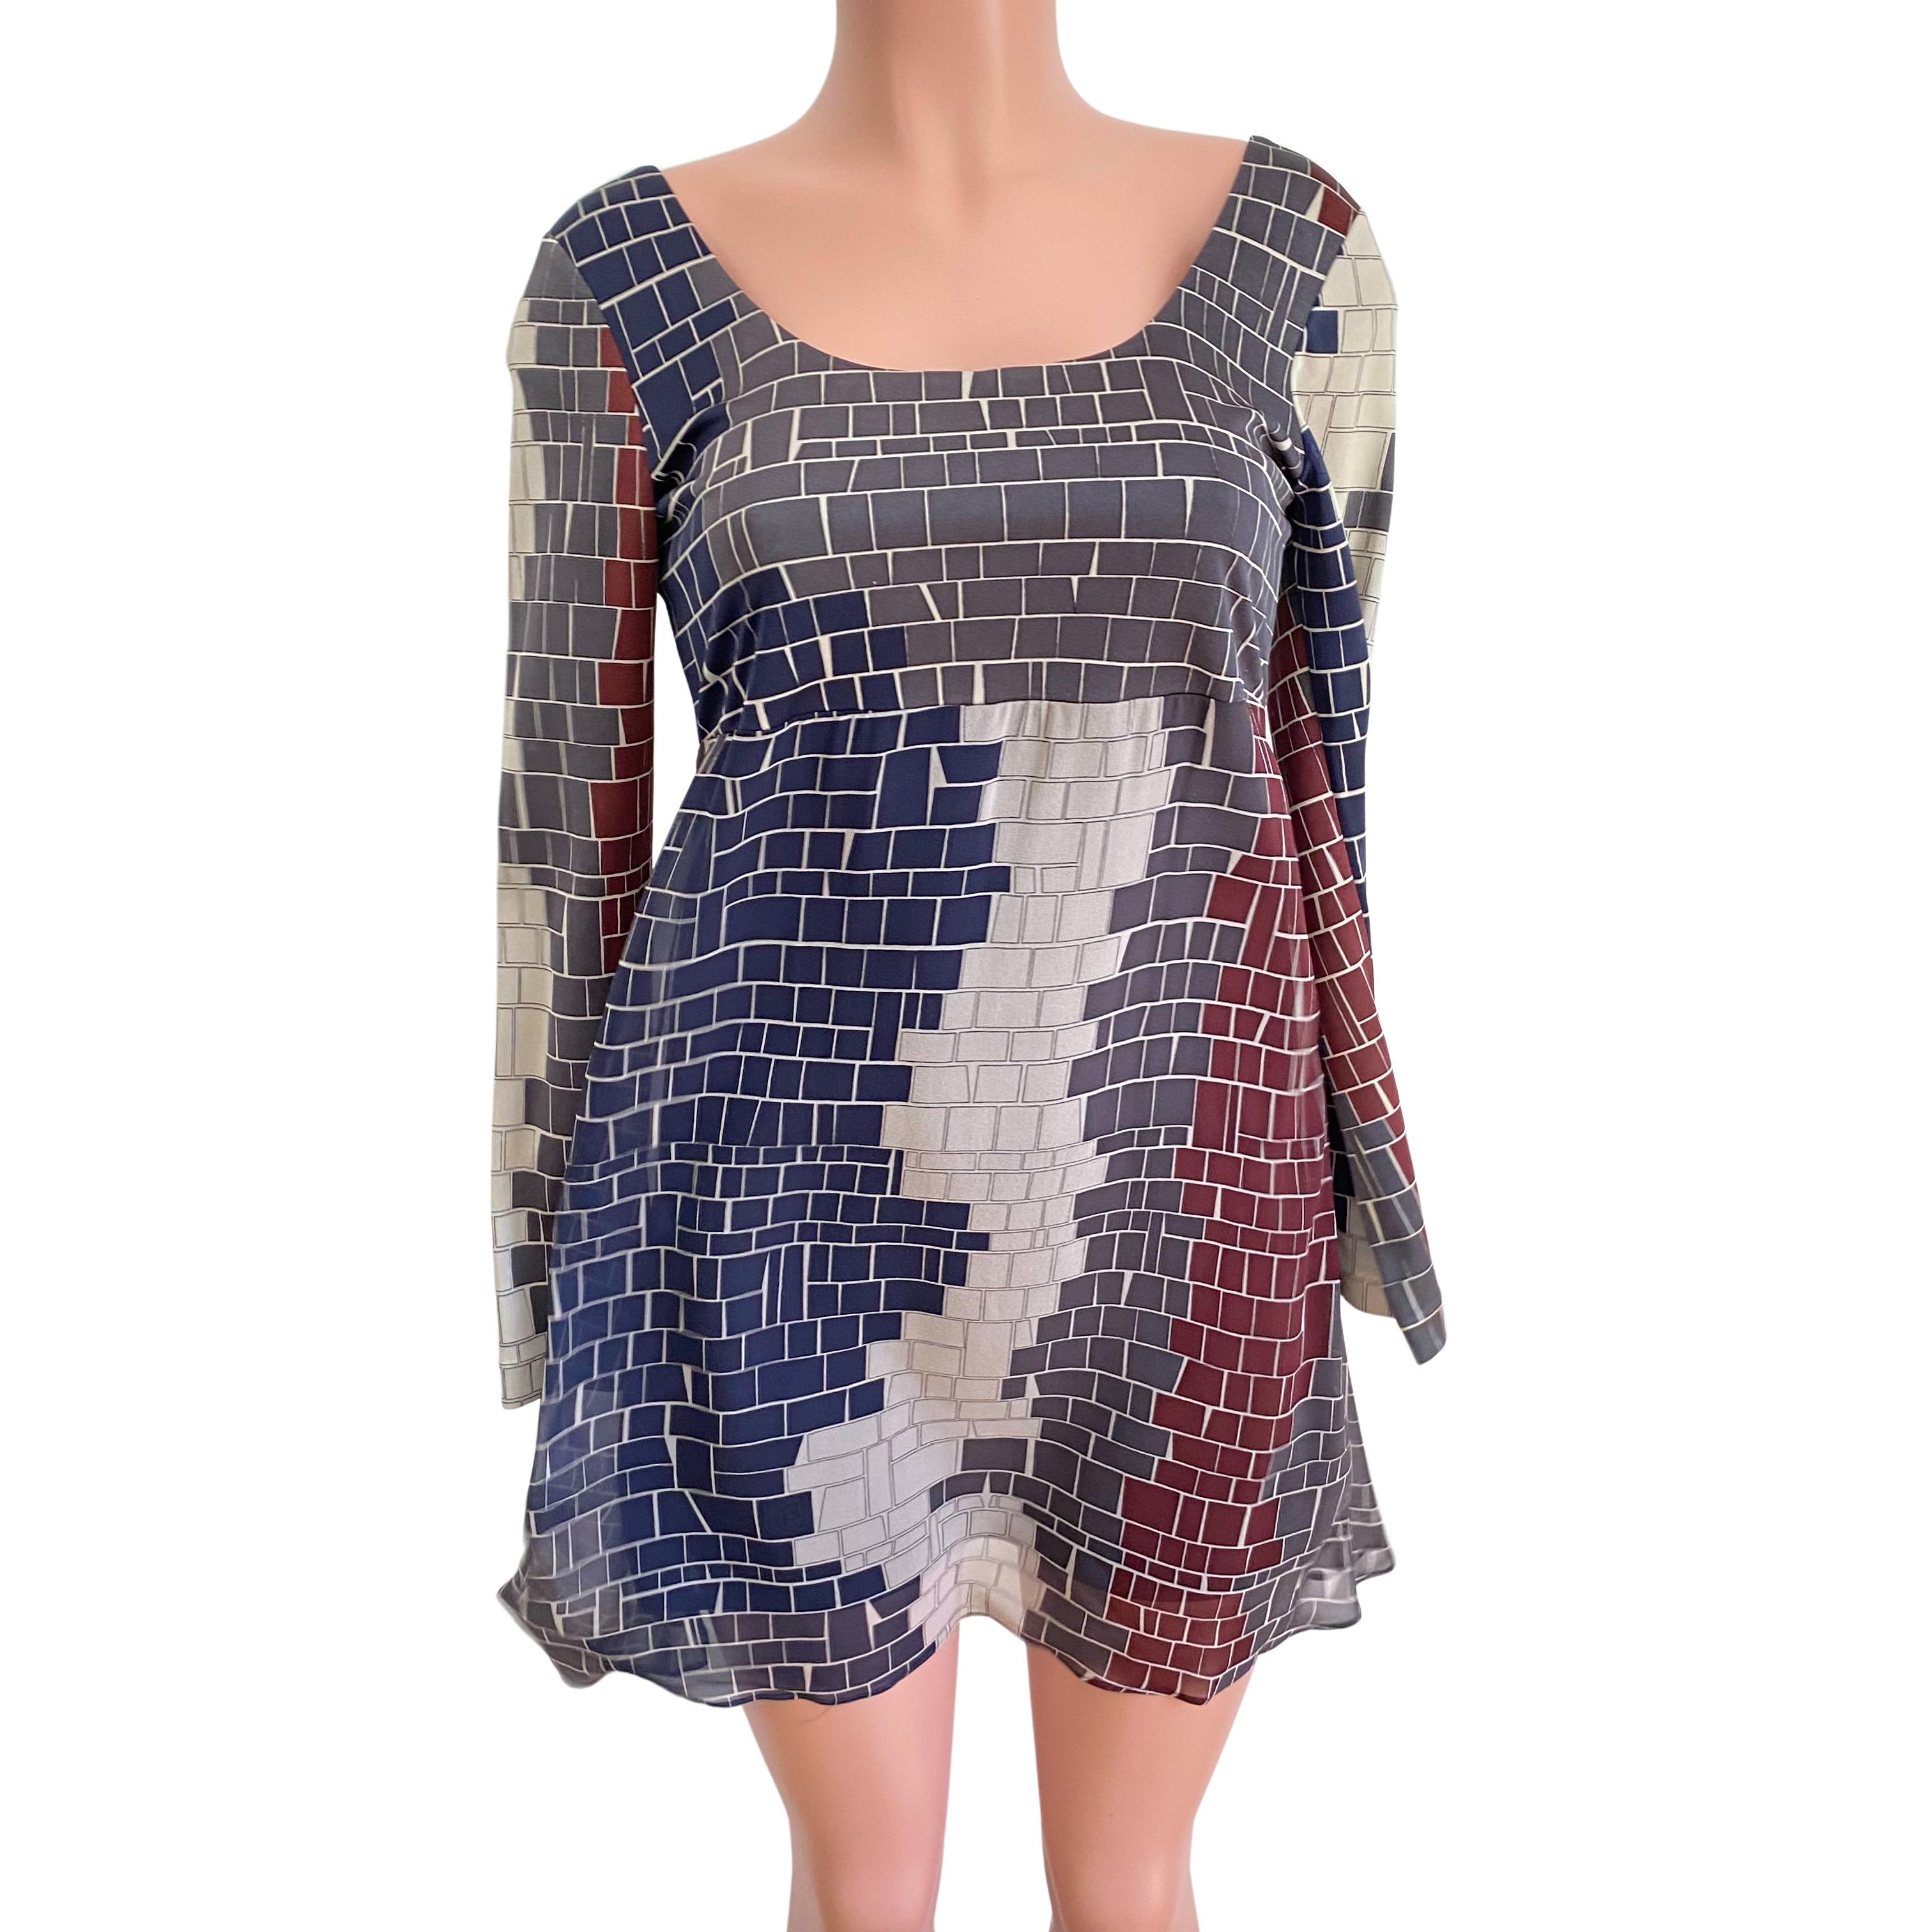 Women's Mixed Media FLORA KUNG Printed Mini Silk Dress - NWT For Sale